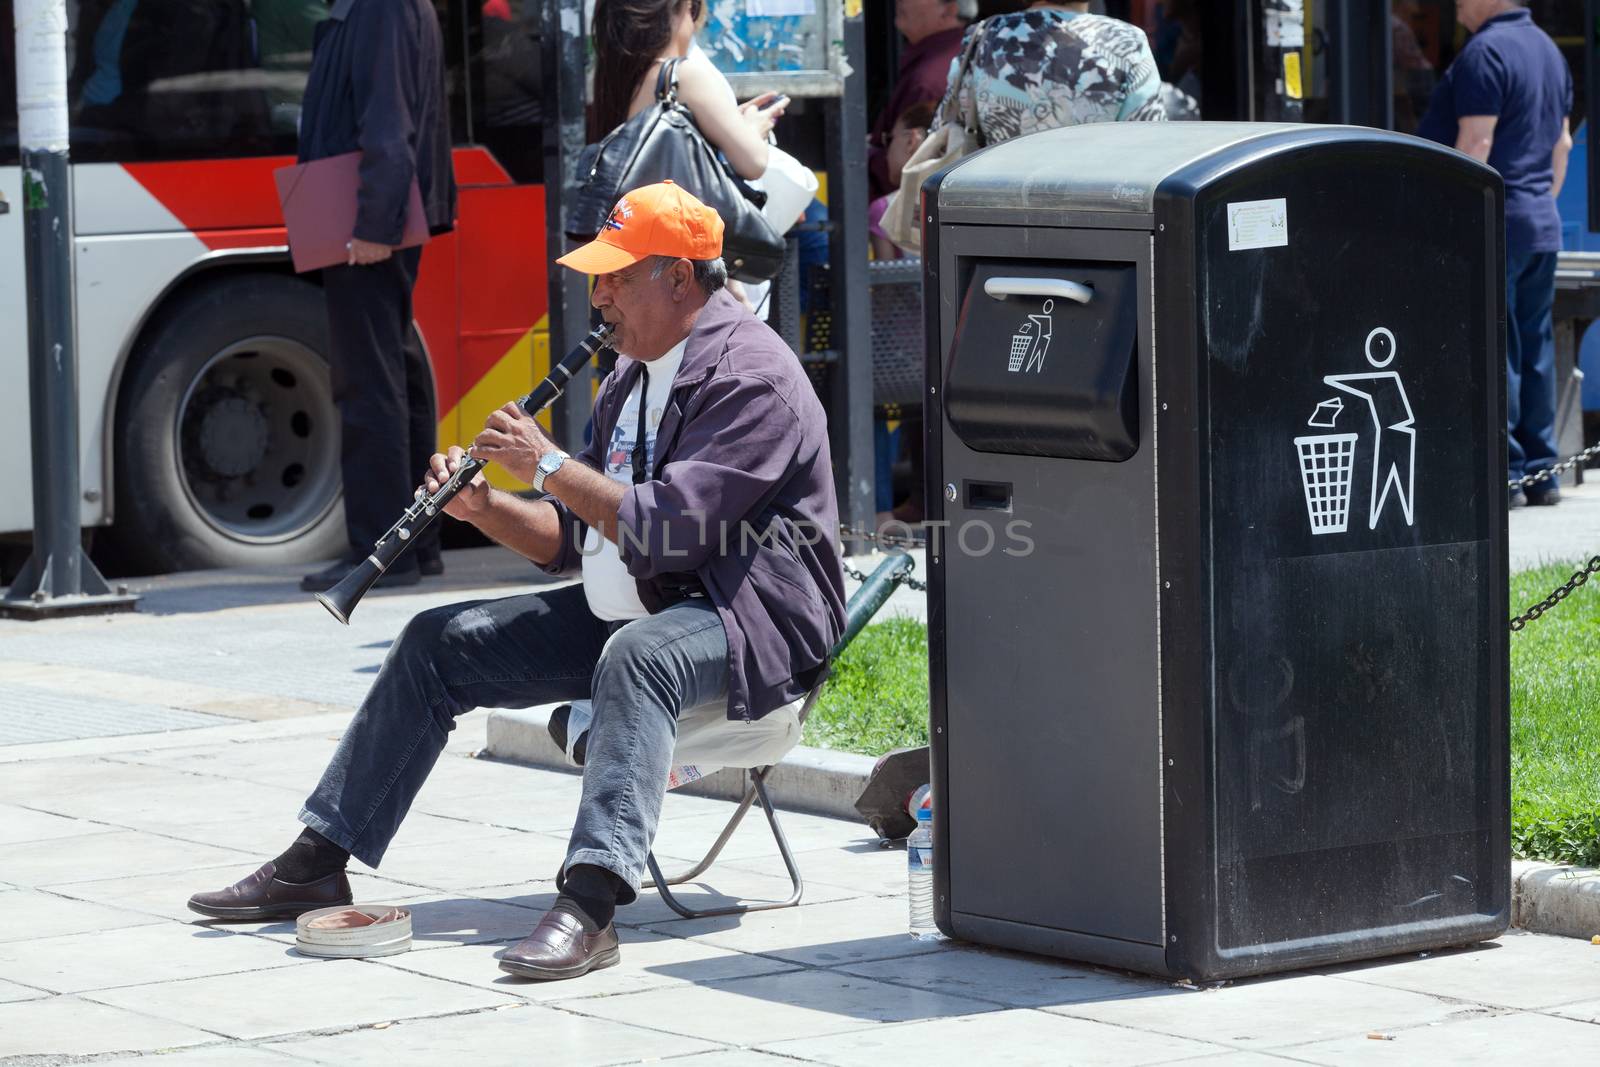 THESSALONIKI, GREECE - JUNE 28: The number of street musicians in the city has increased dramatically. The economic crisis has hit the elderly on June 28, 2011 in Thessaloniki, Greece